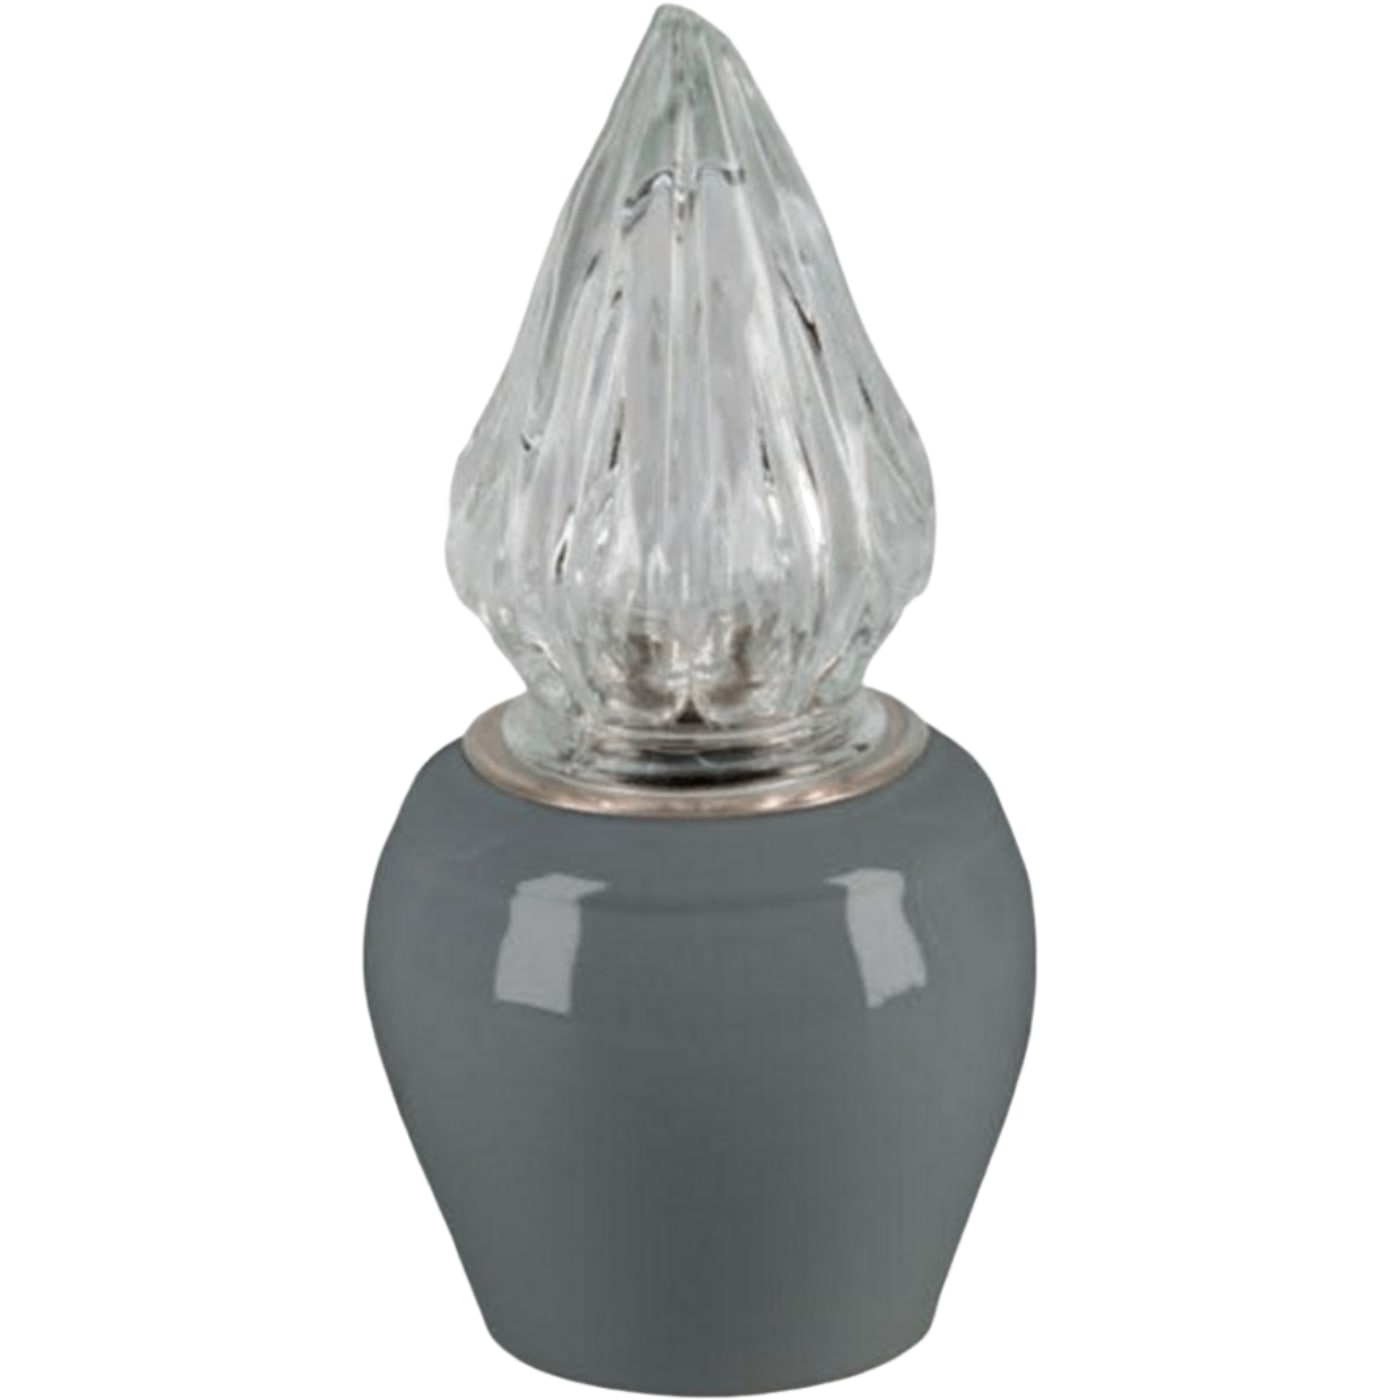 Grave light Liscia gray 10x10cm - 3.9x3.9in In gray porcelain, wall attached LI146P/G